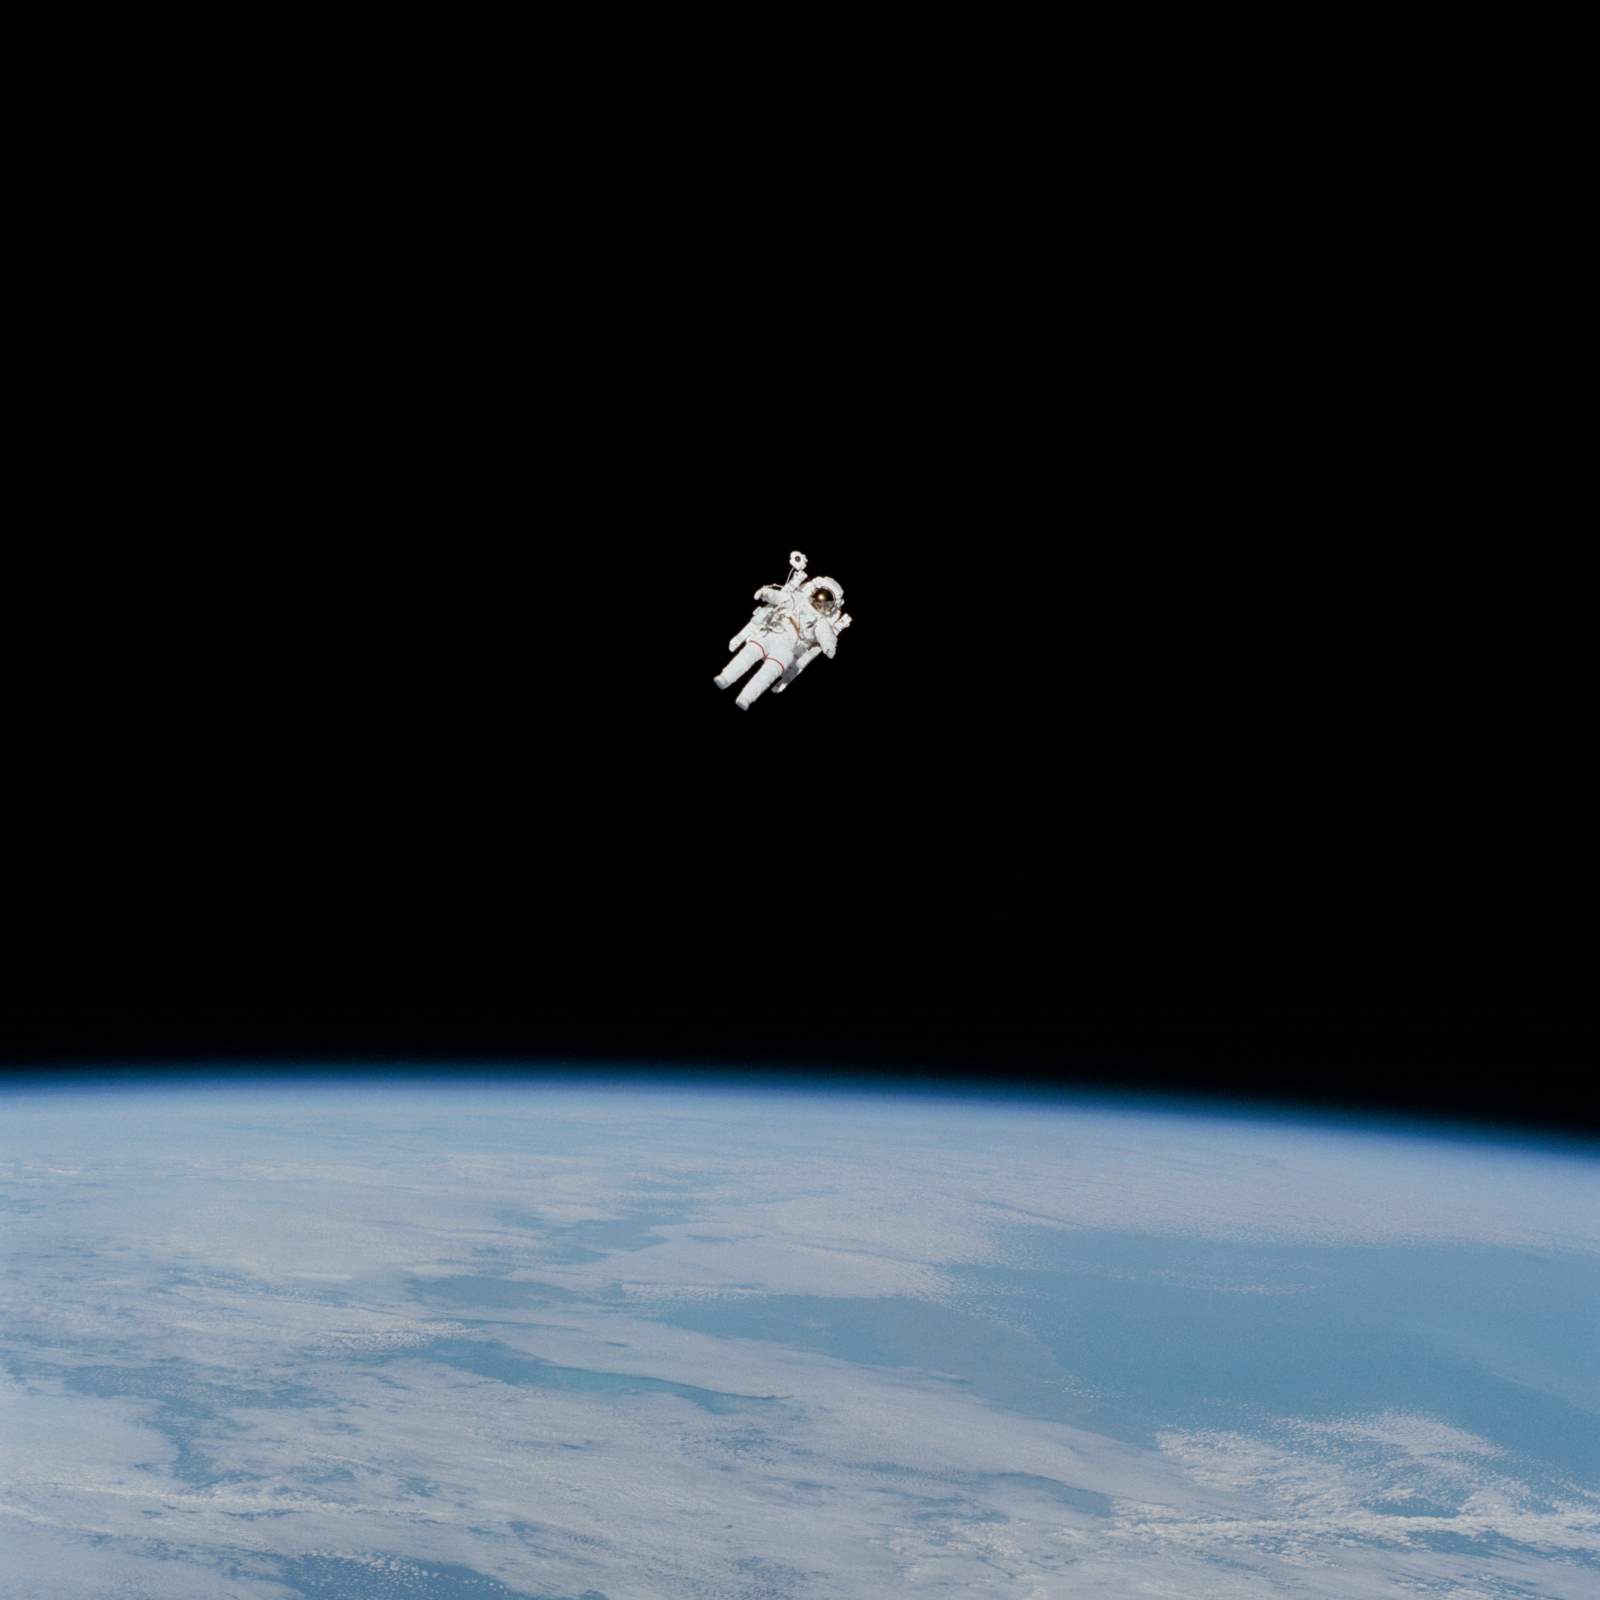 Bruce McCandless II performs the first untethered spacewalk on February 7, 1984